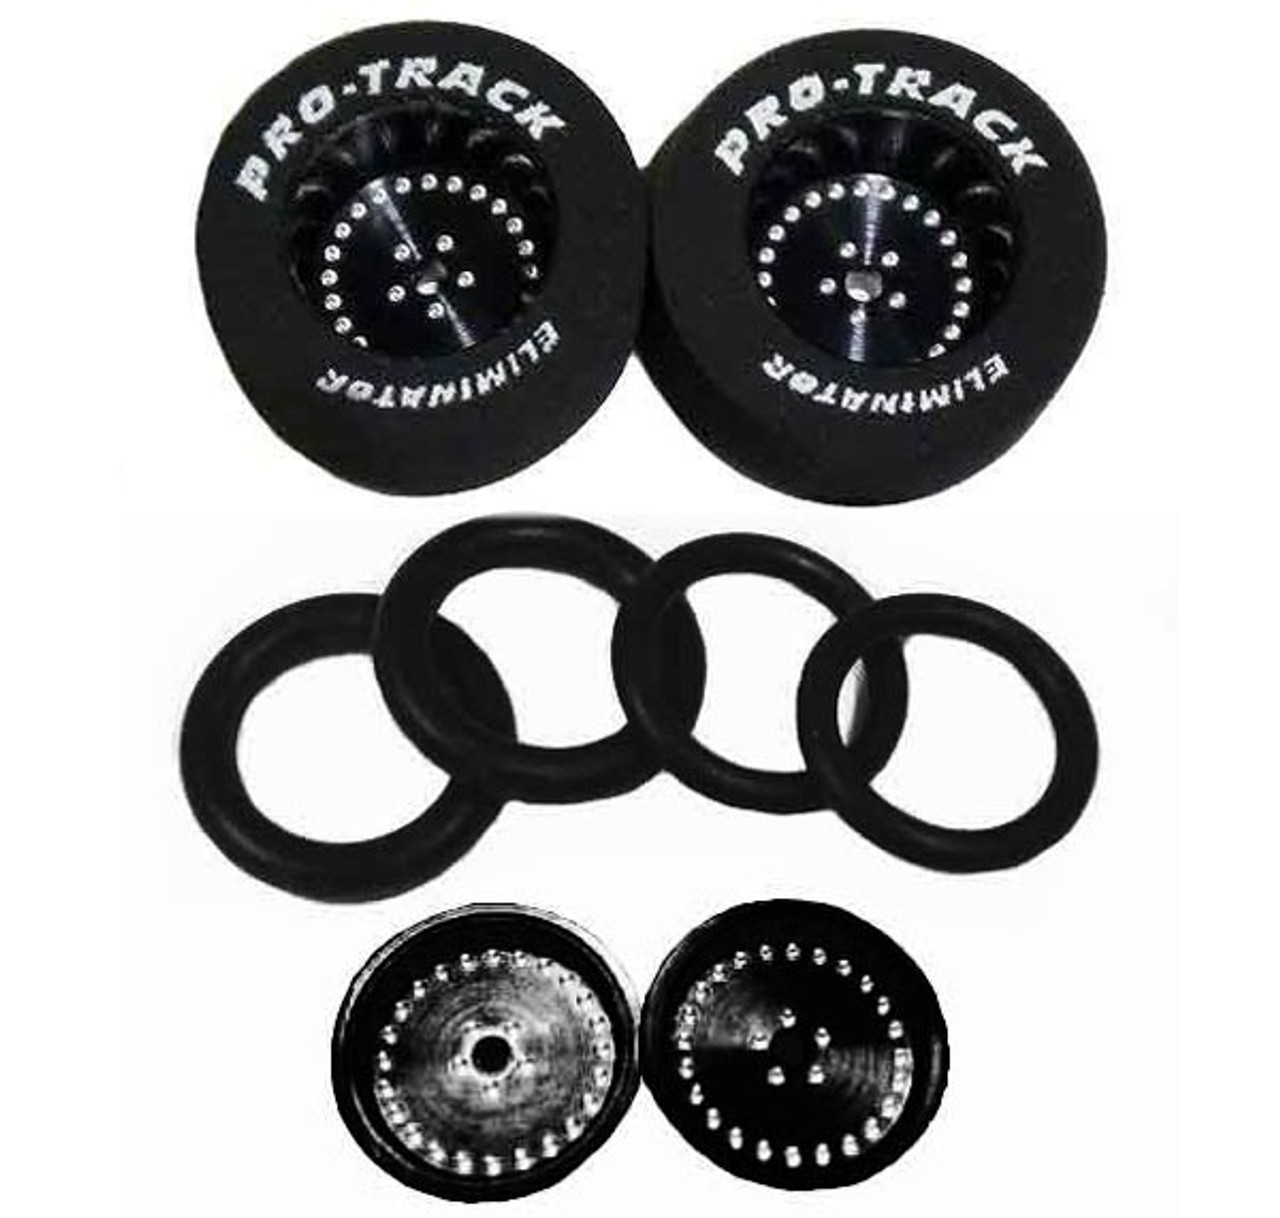 Pro-Track 1 1/16 x 3/32 x .500 wide Rears & Fronts - Style G - Black -PTC-N407G-BL-SET